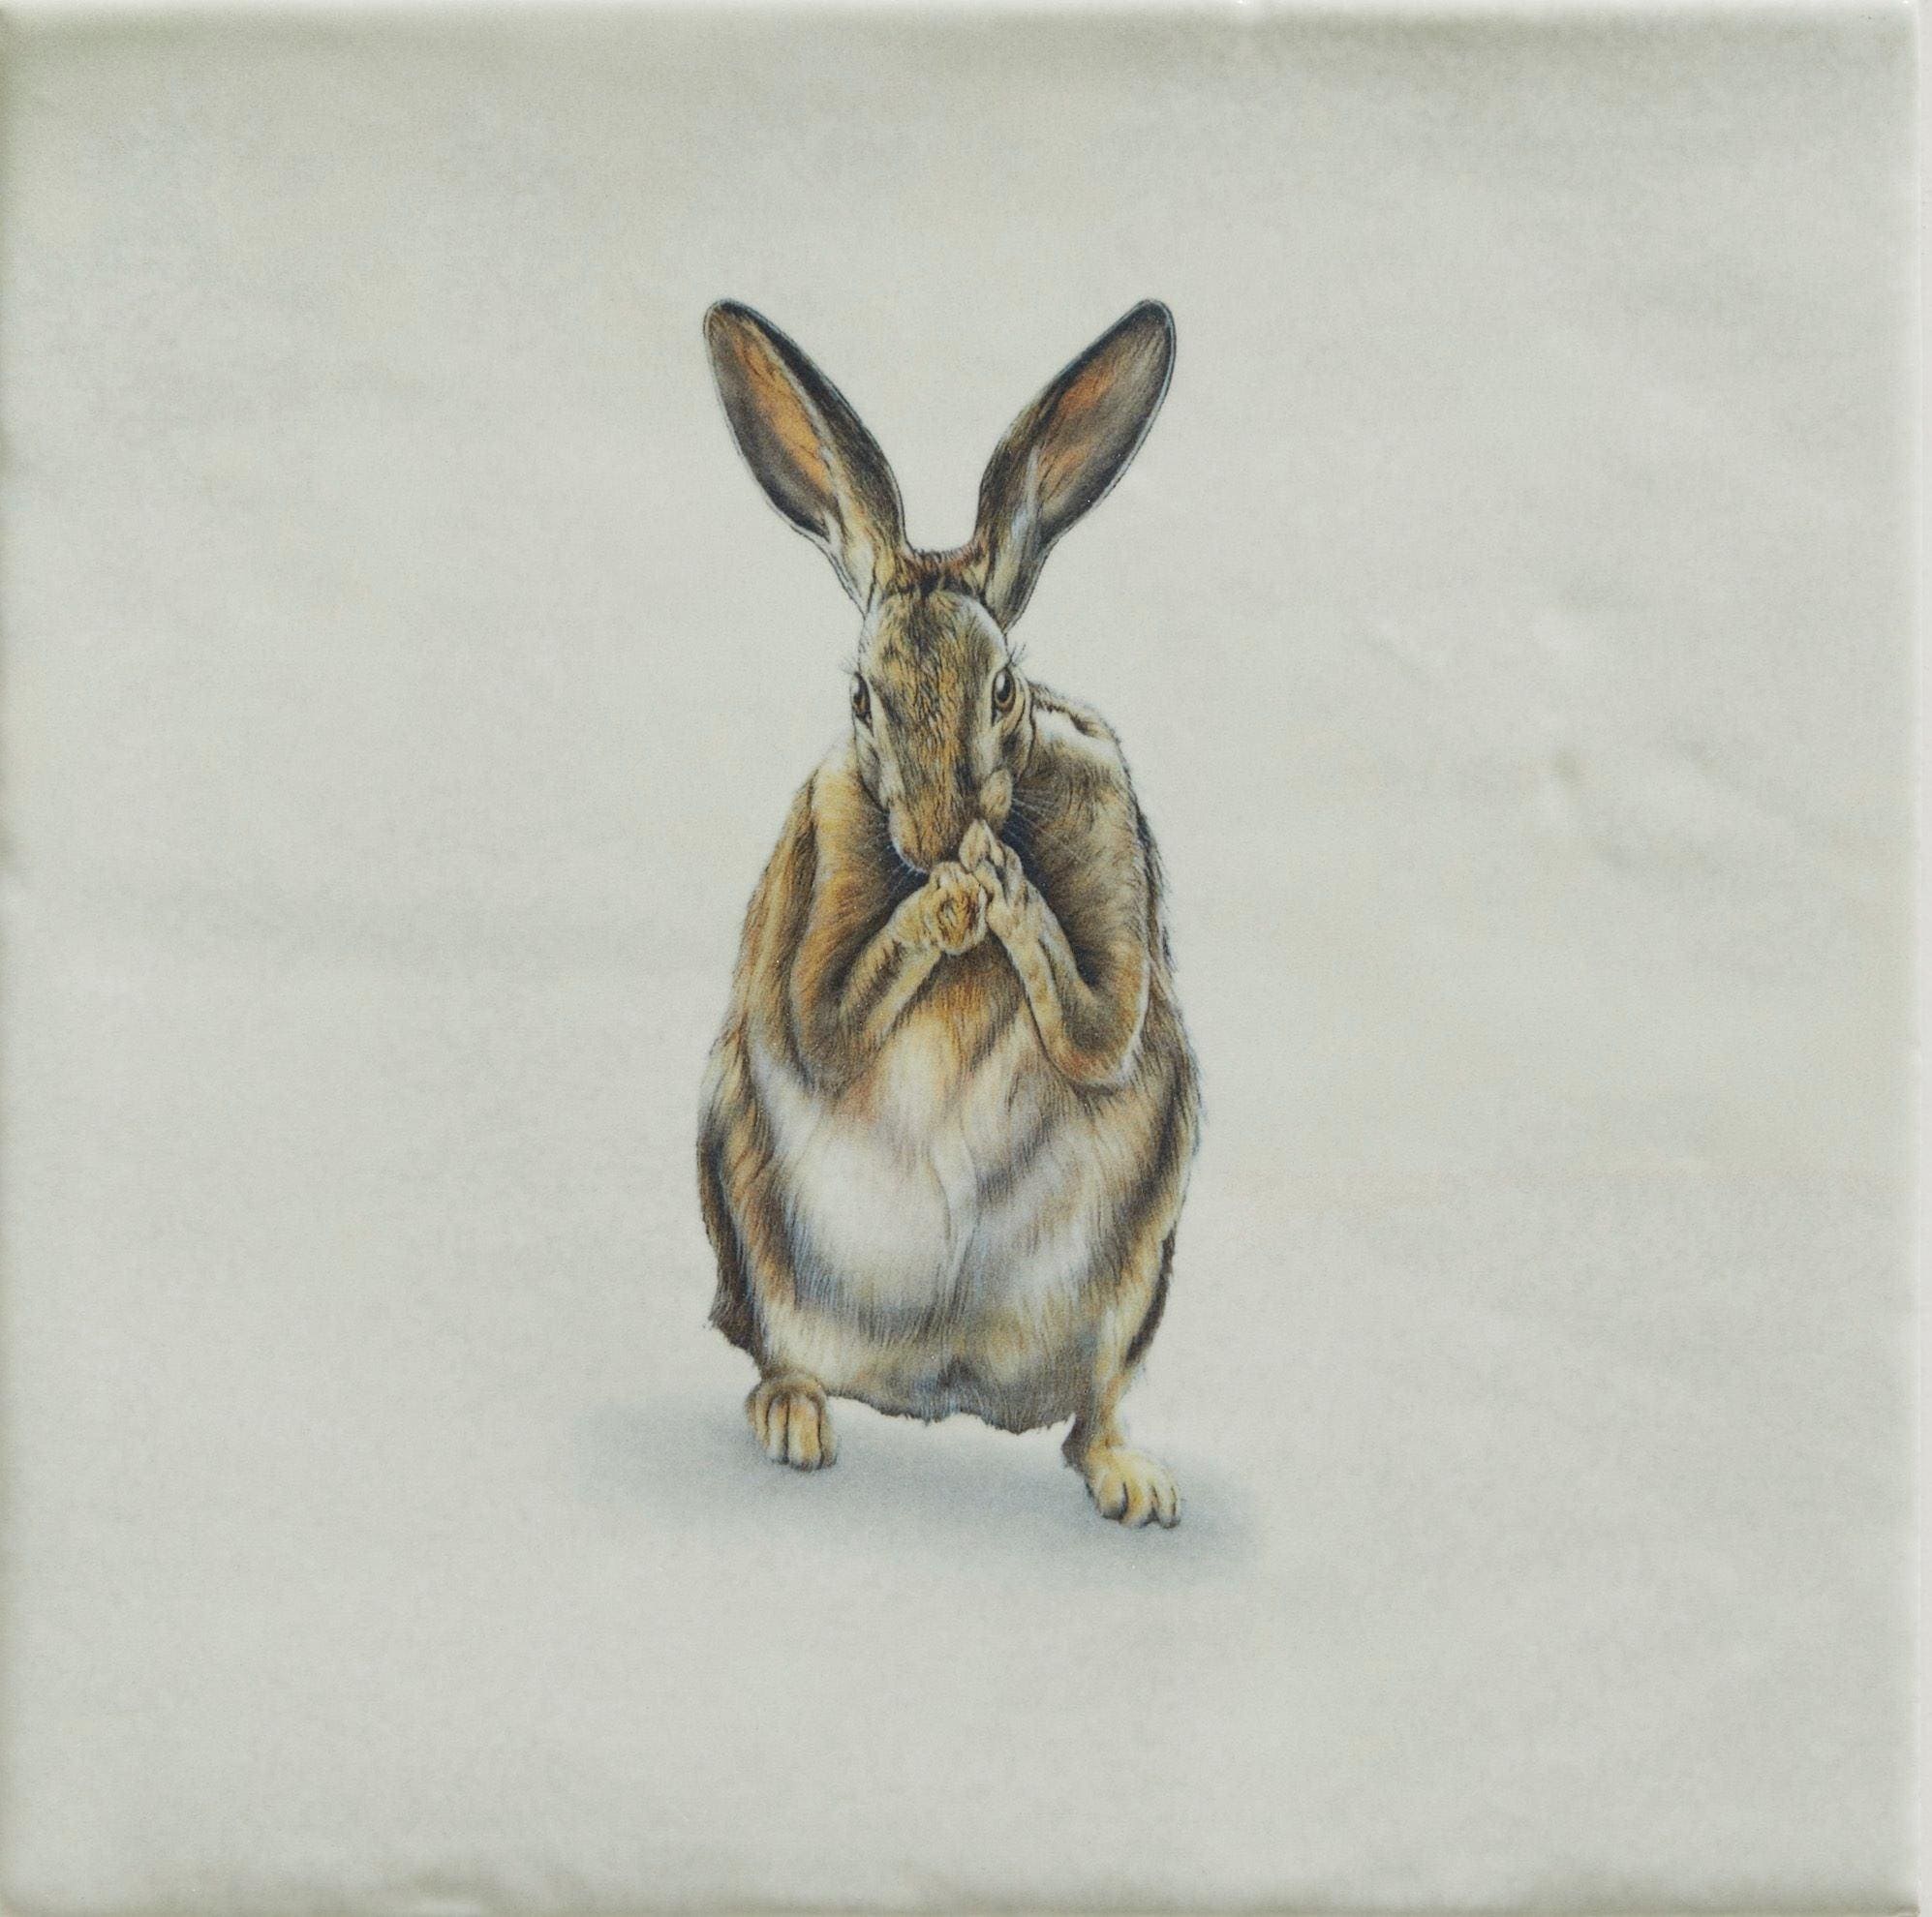 Ca’ Pietra Tiles - Ceramic Paws 12.5 x 12.5cm Wiltshire Hares By Joanna May